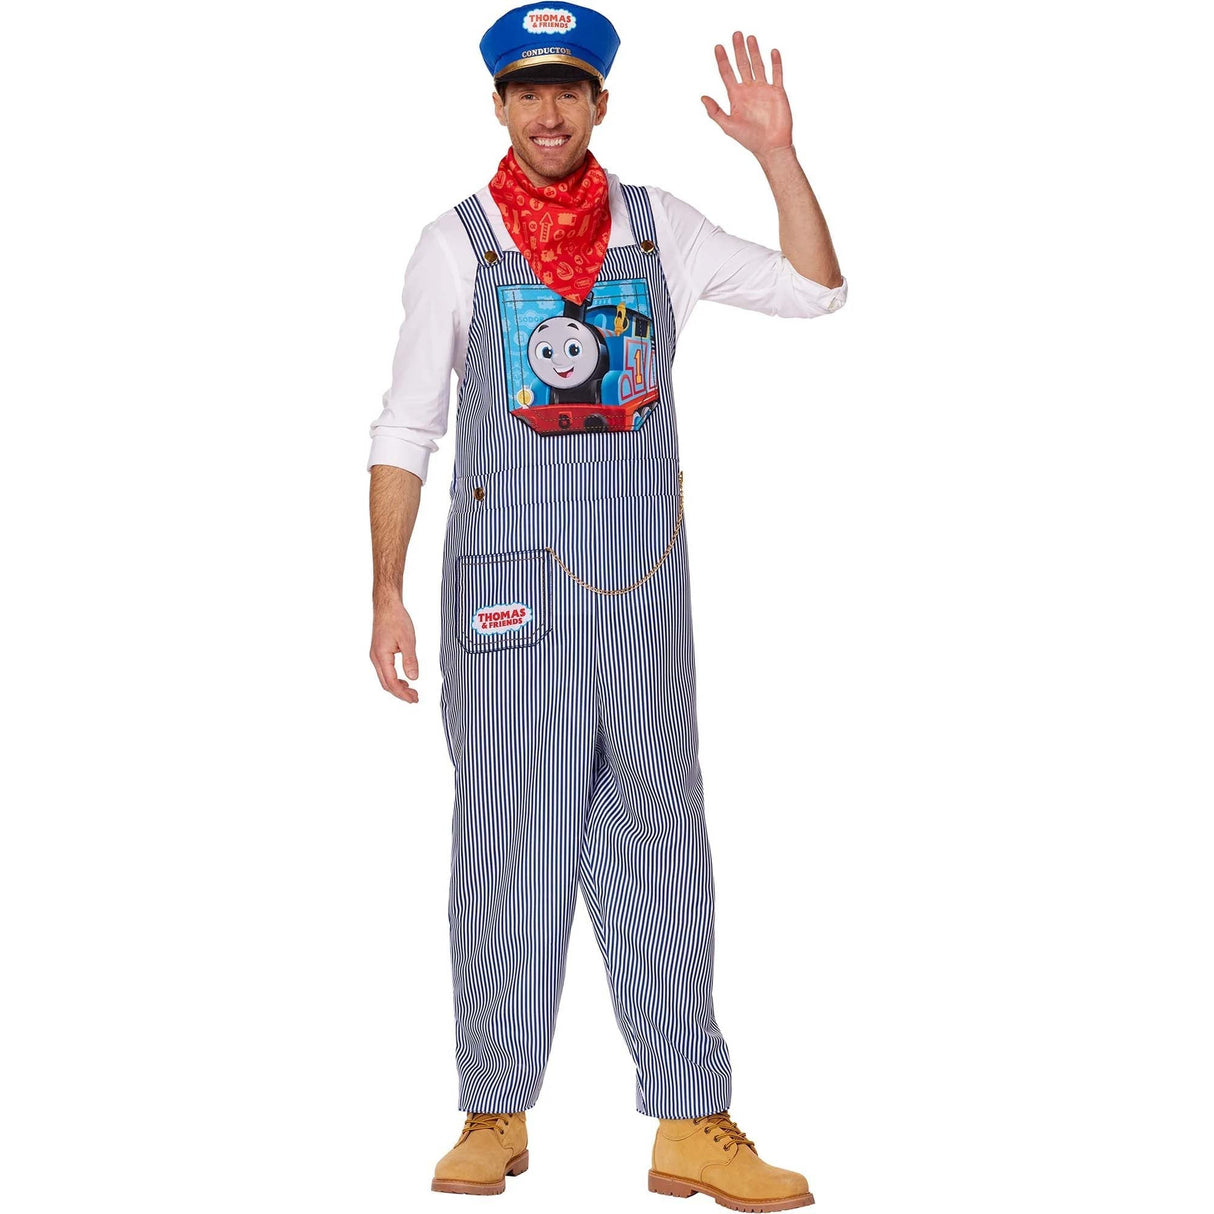 IN SPIRIT DESIGNS Costumes Thomas the Tank Conductor Costume for Adults, Striped Overalls